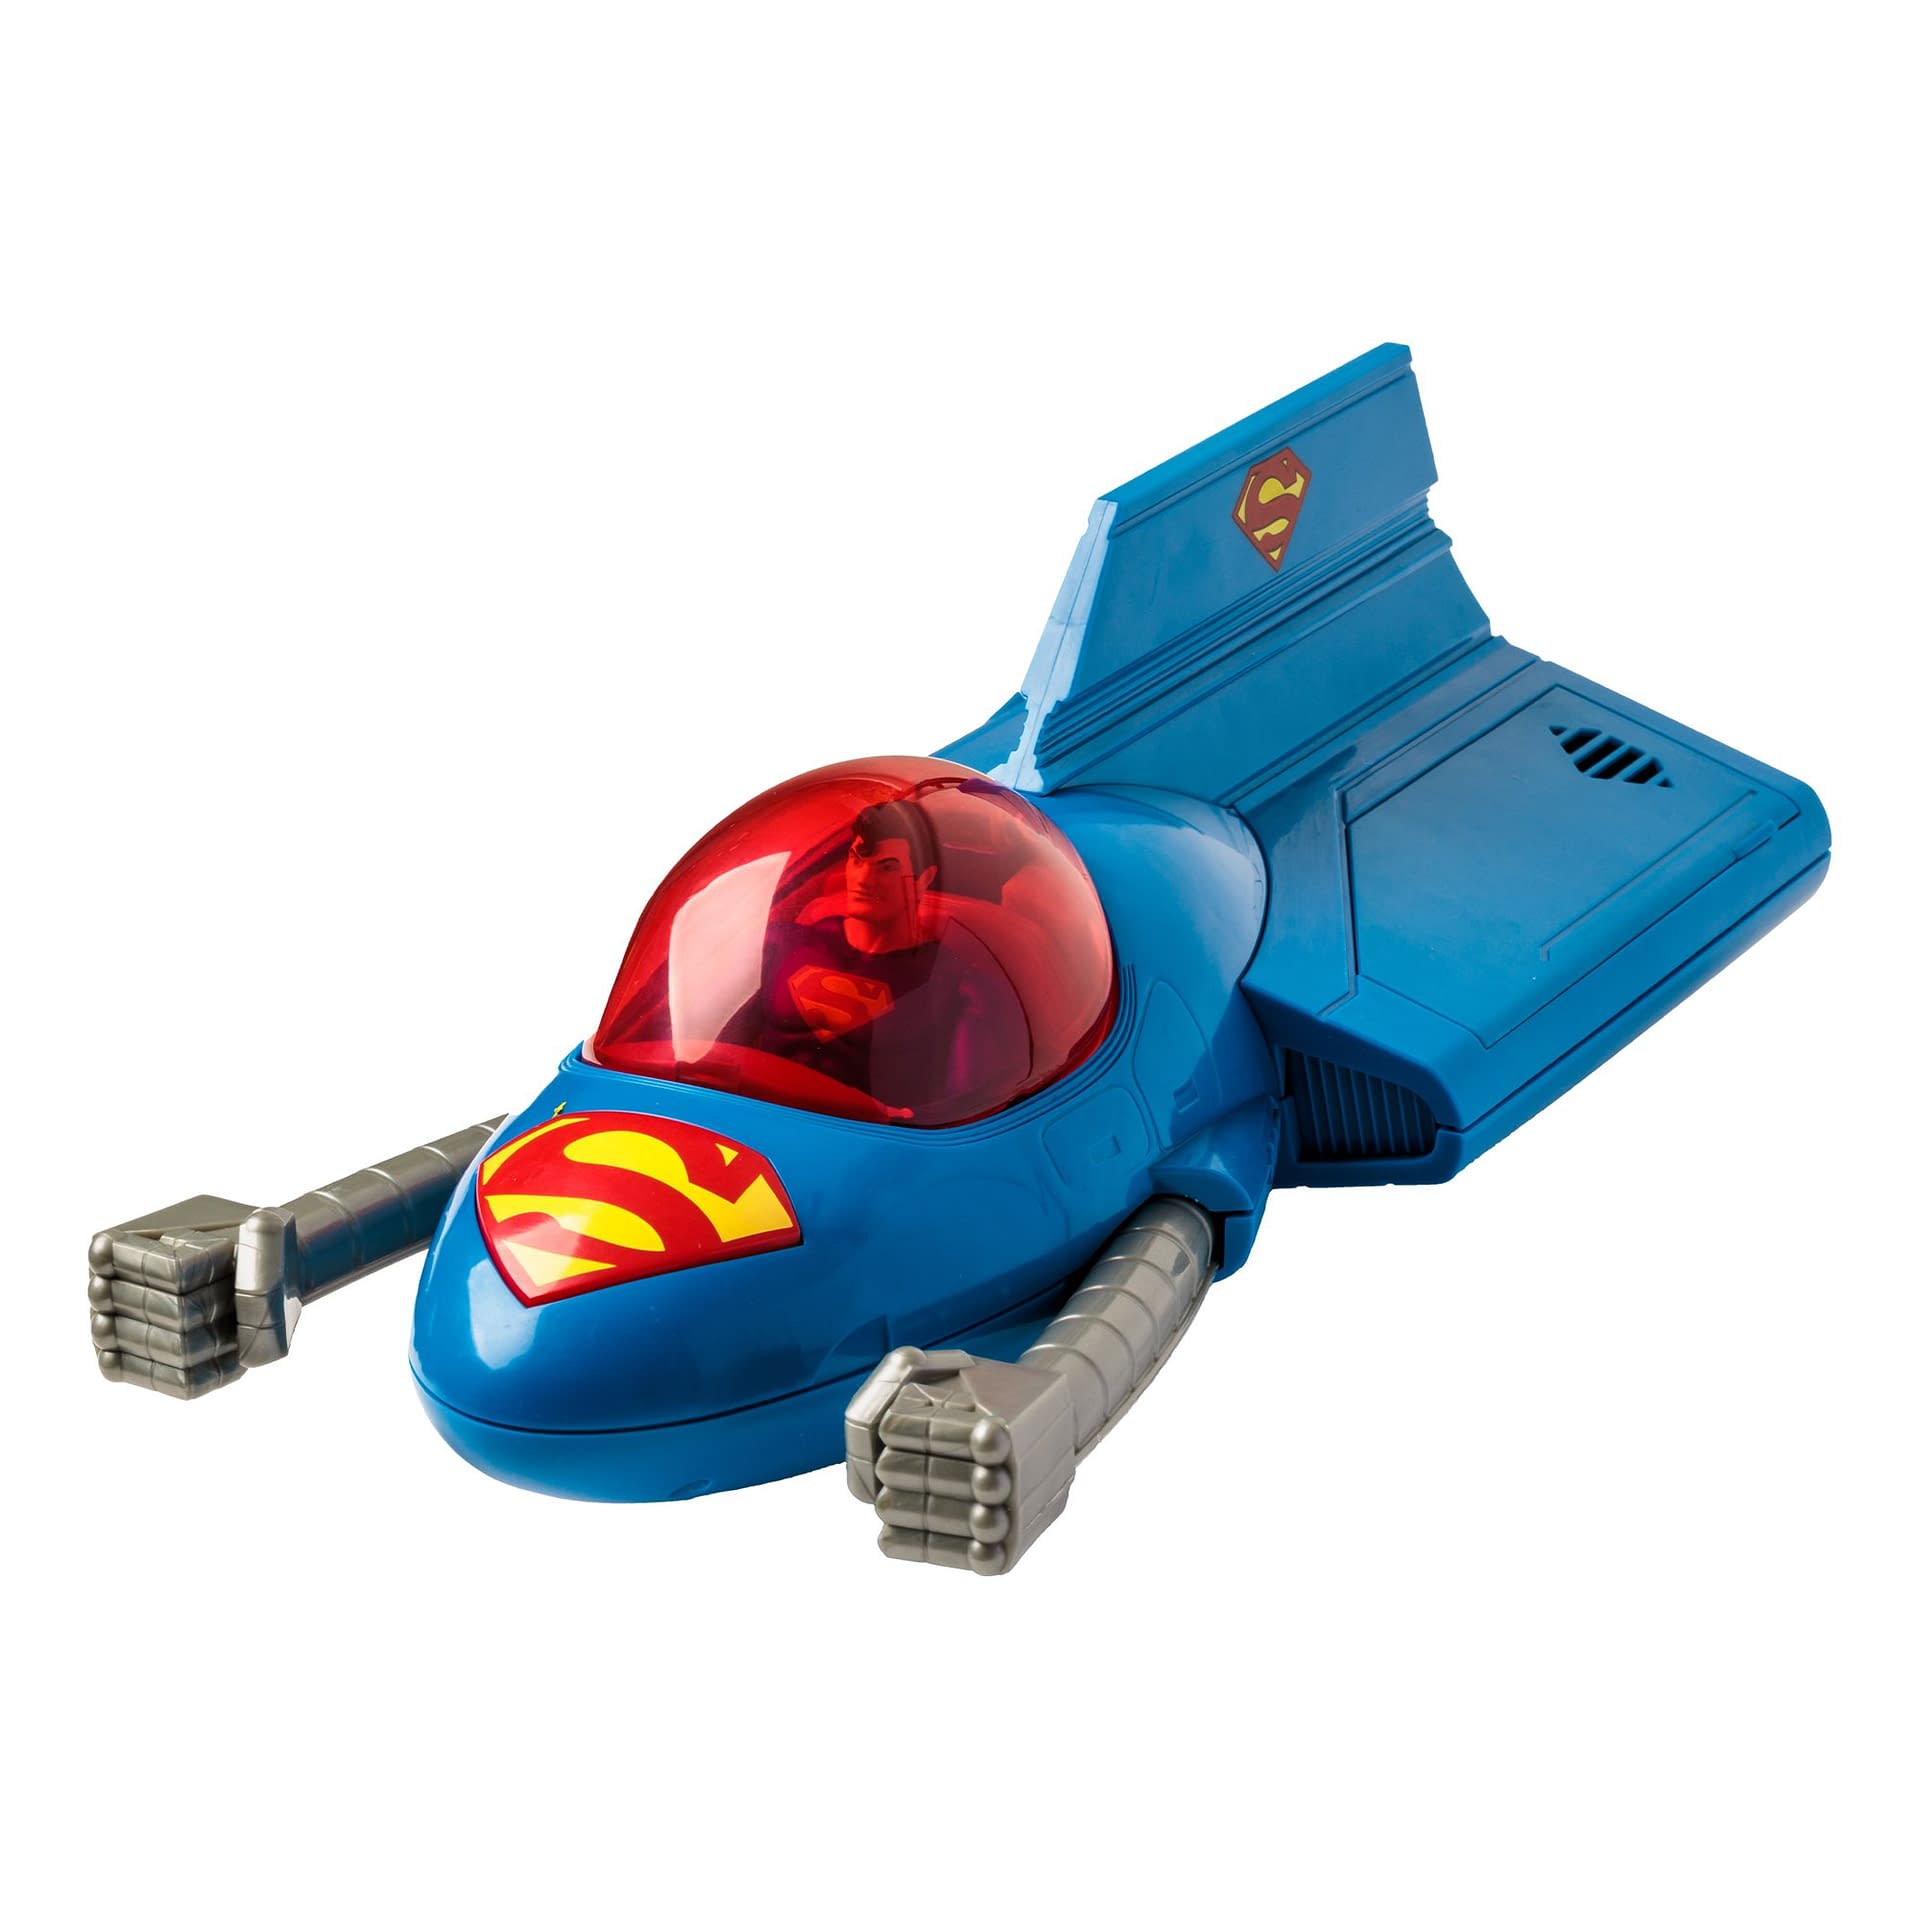 DC Comics Super Powers Vehicles Arriving from McFarlane Toys 